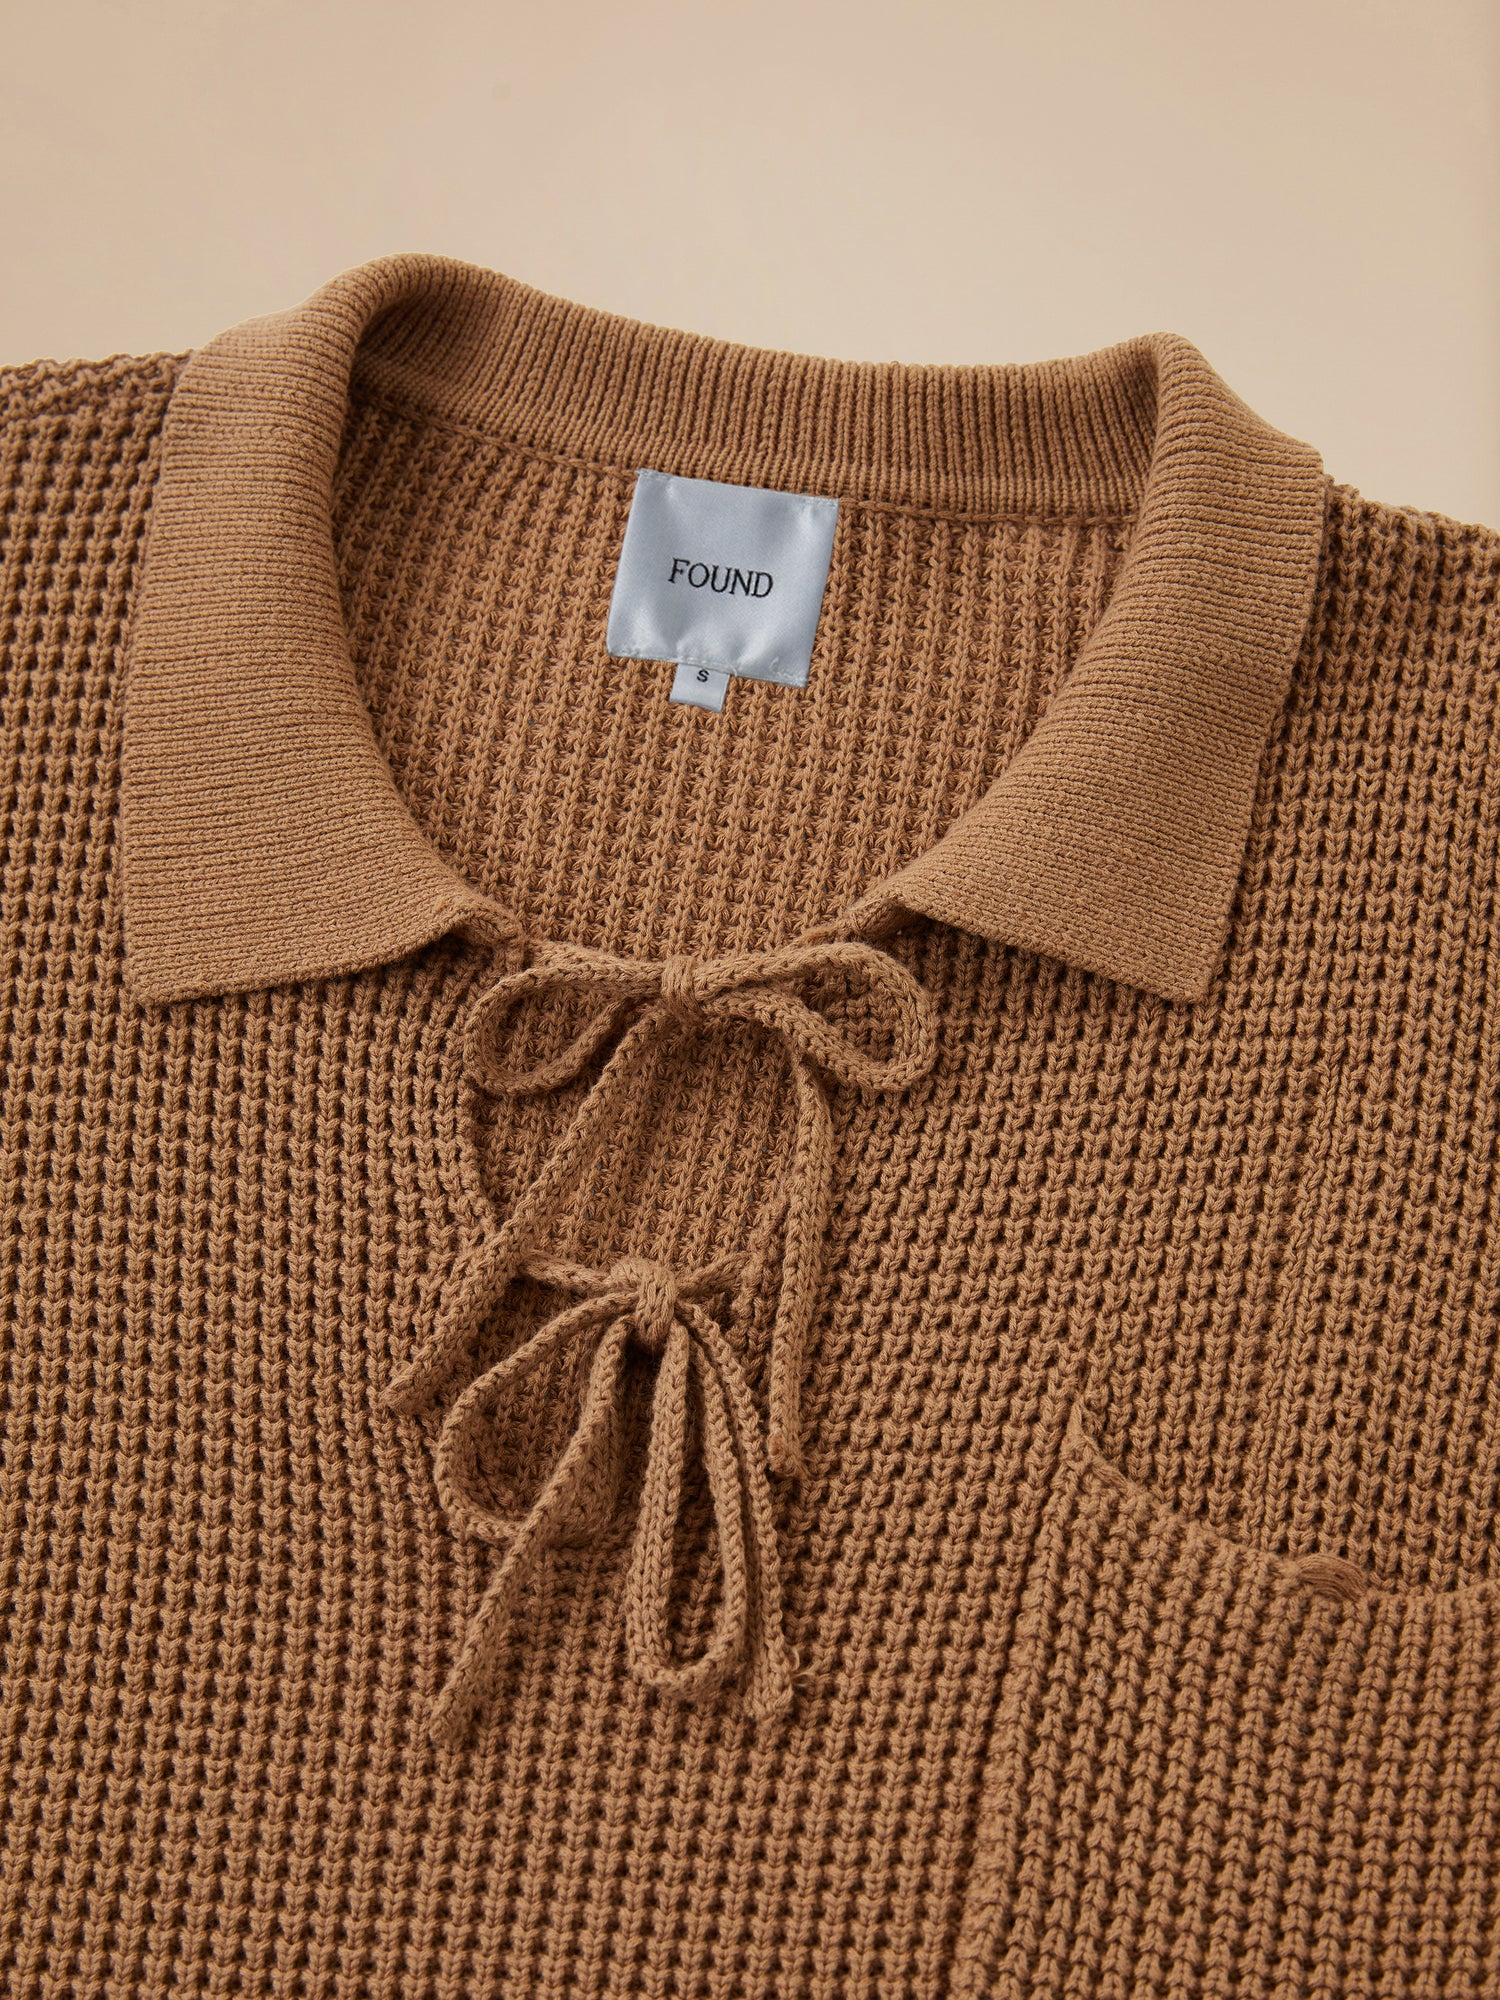 A cozy Found Tie-Collar Knit Sweater in a ginger color.